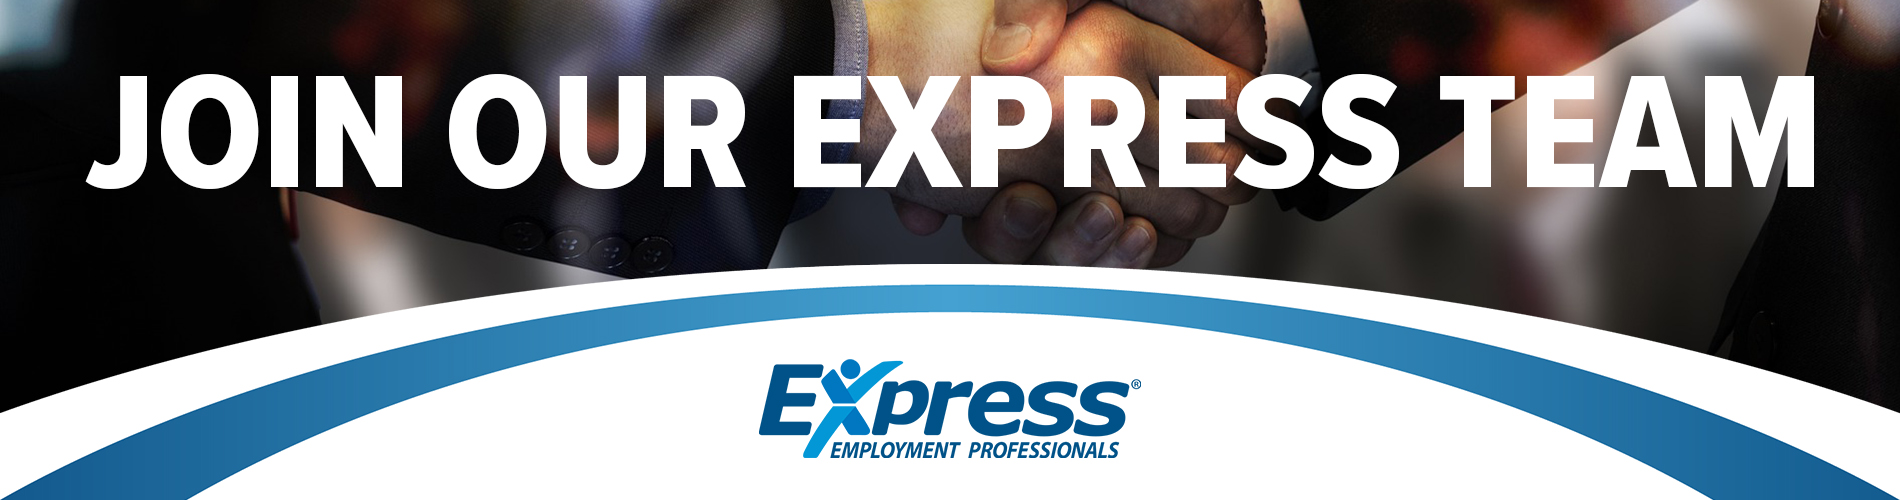 Join Our Express Team! - Staffing Jobs in Oregon City